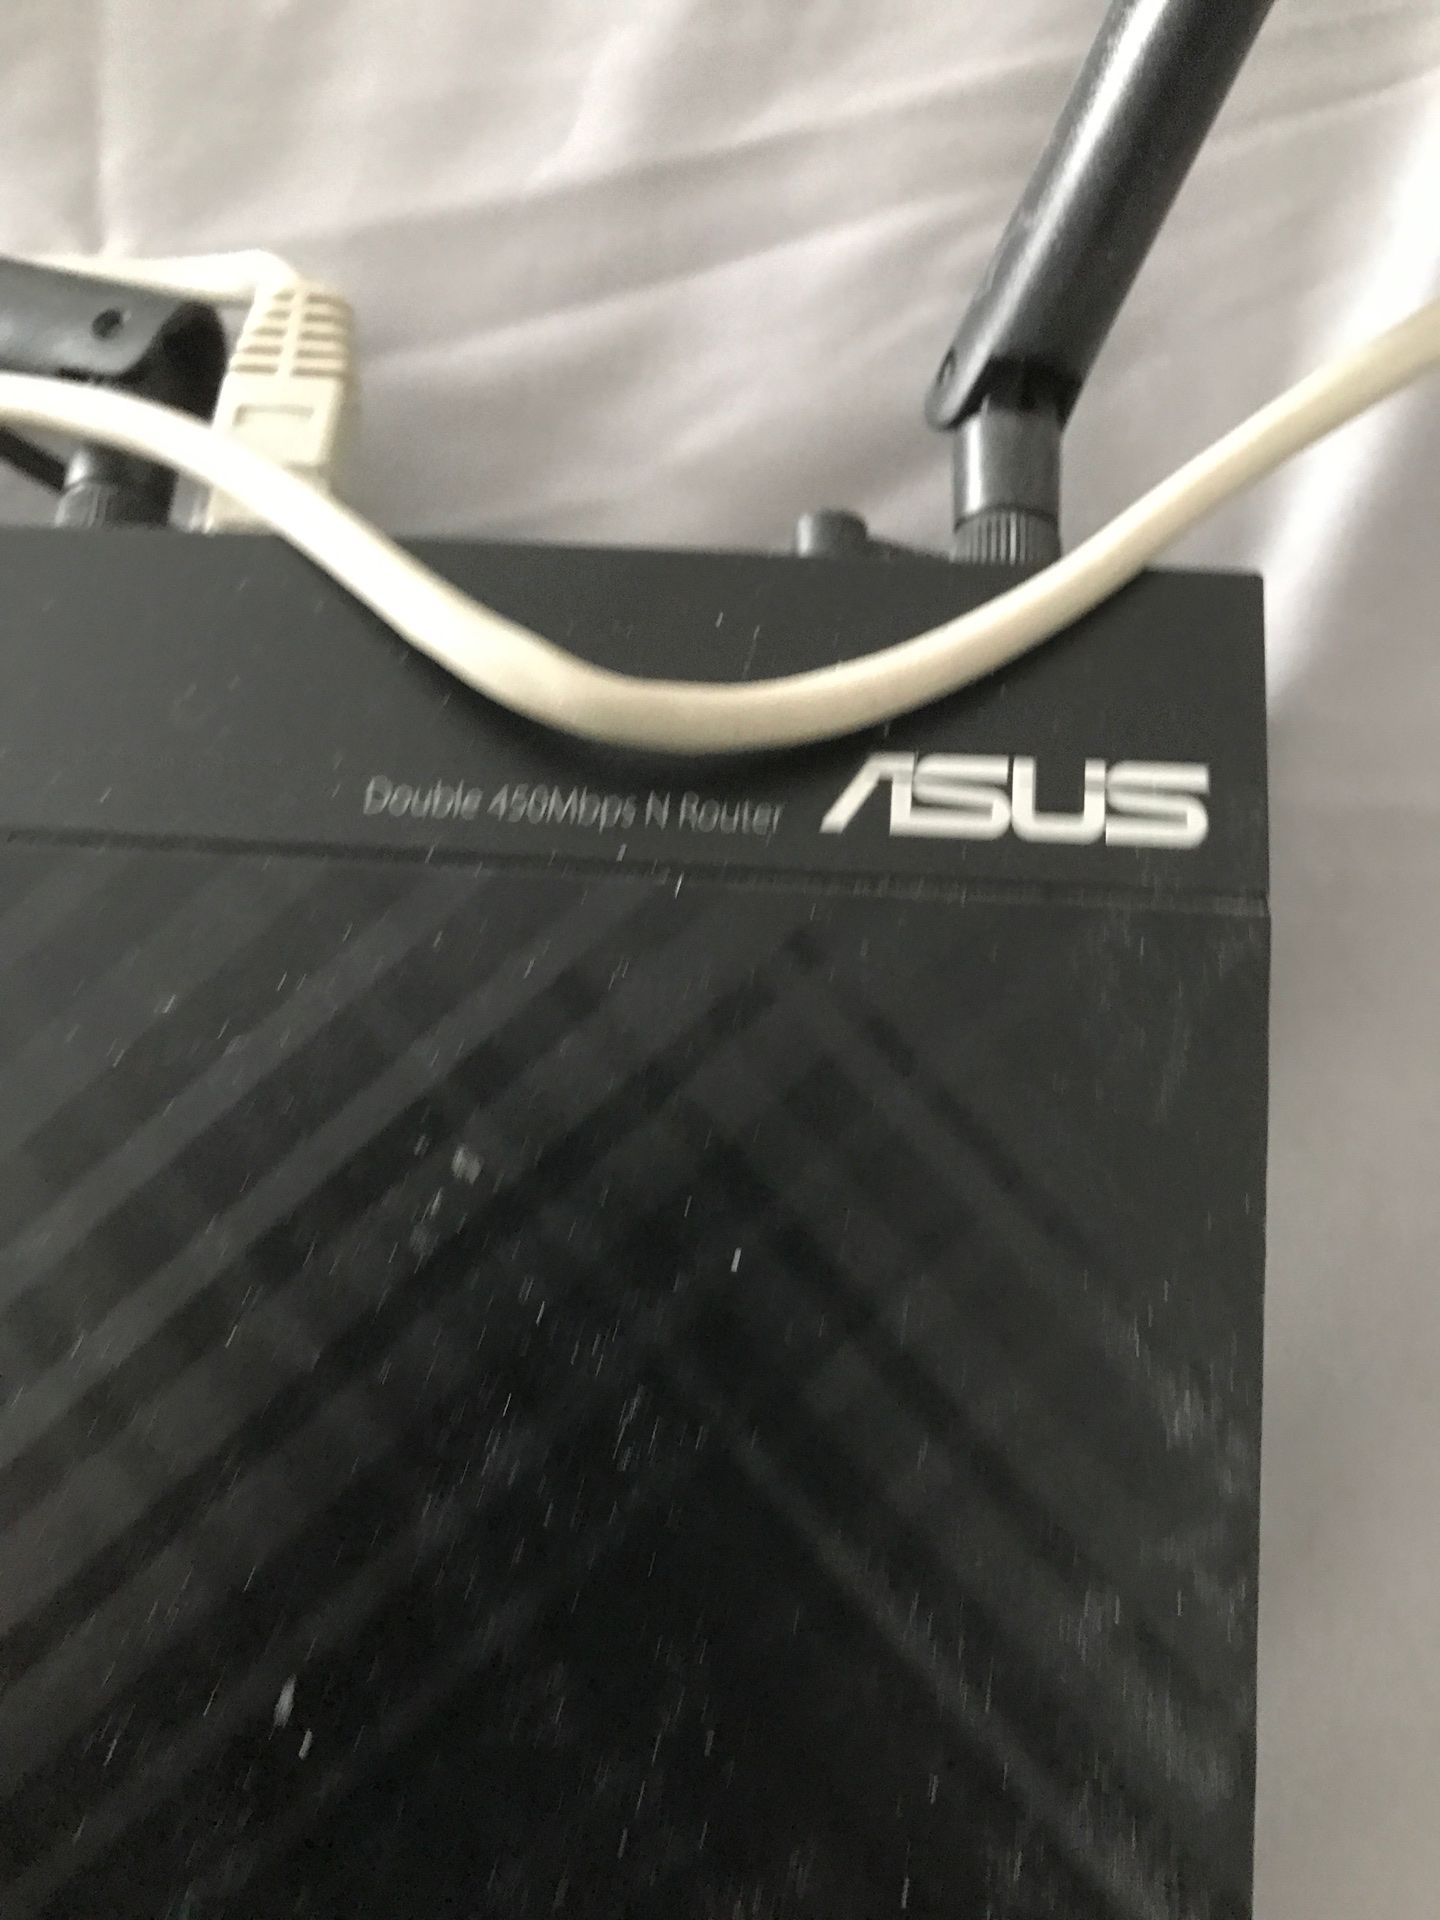 Asus router 450mpbs